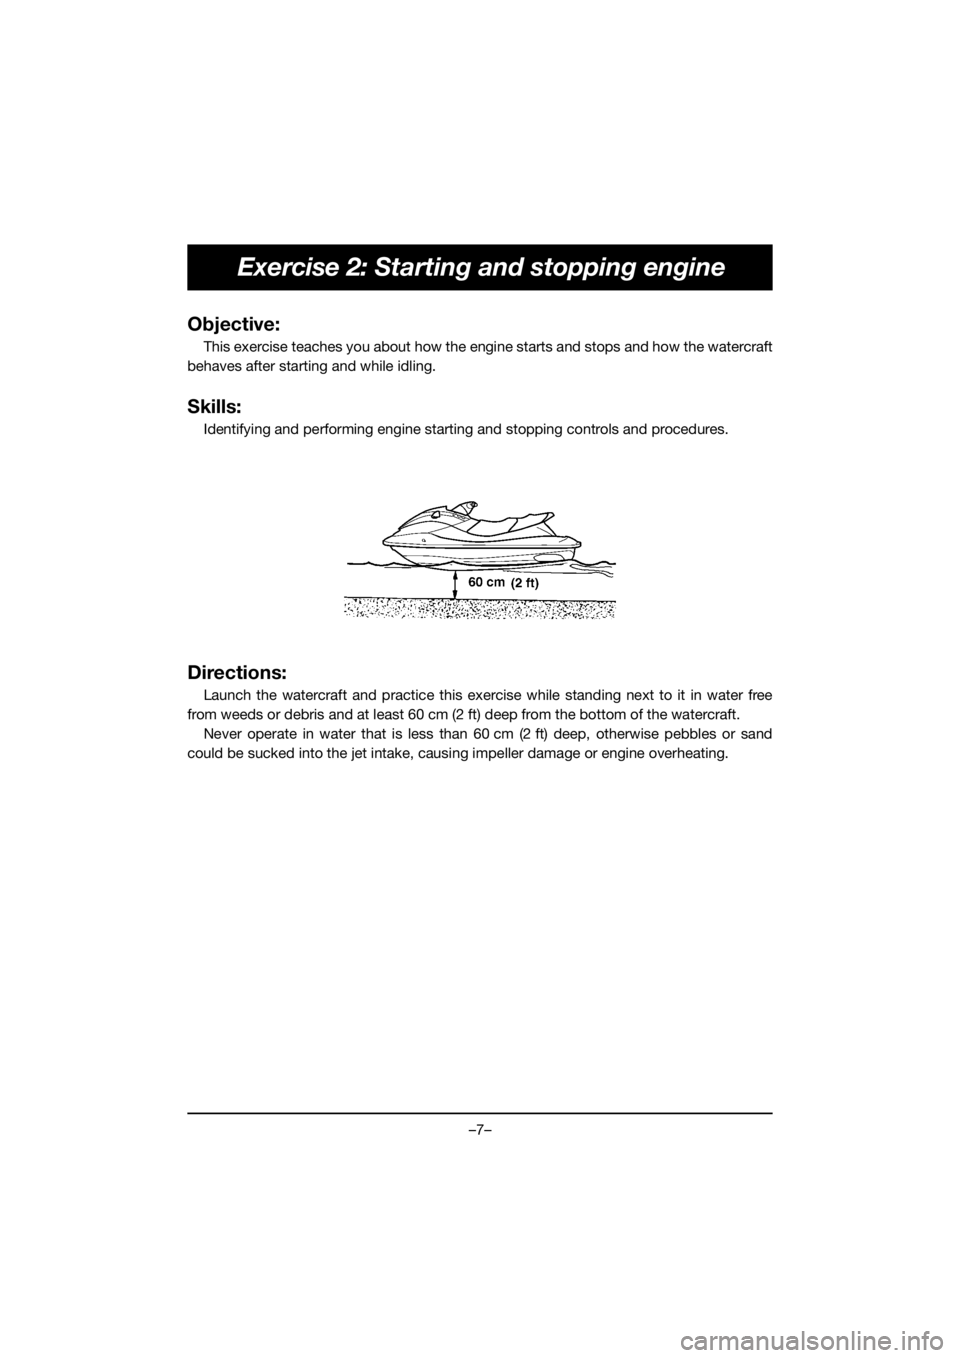 YAMAHA EXR 2020 User Guide –7–
Exercise 2: Starting and stopping engine
Objective:
This exercise teaches you about how the engine starts and stops and how the watercraft
behaves after starting and while idling.
Skills:
Iden